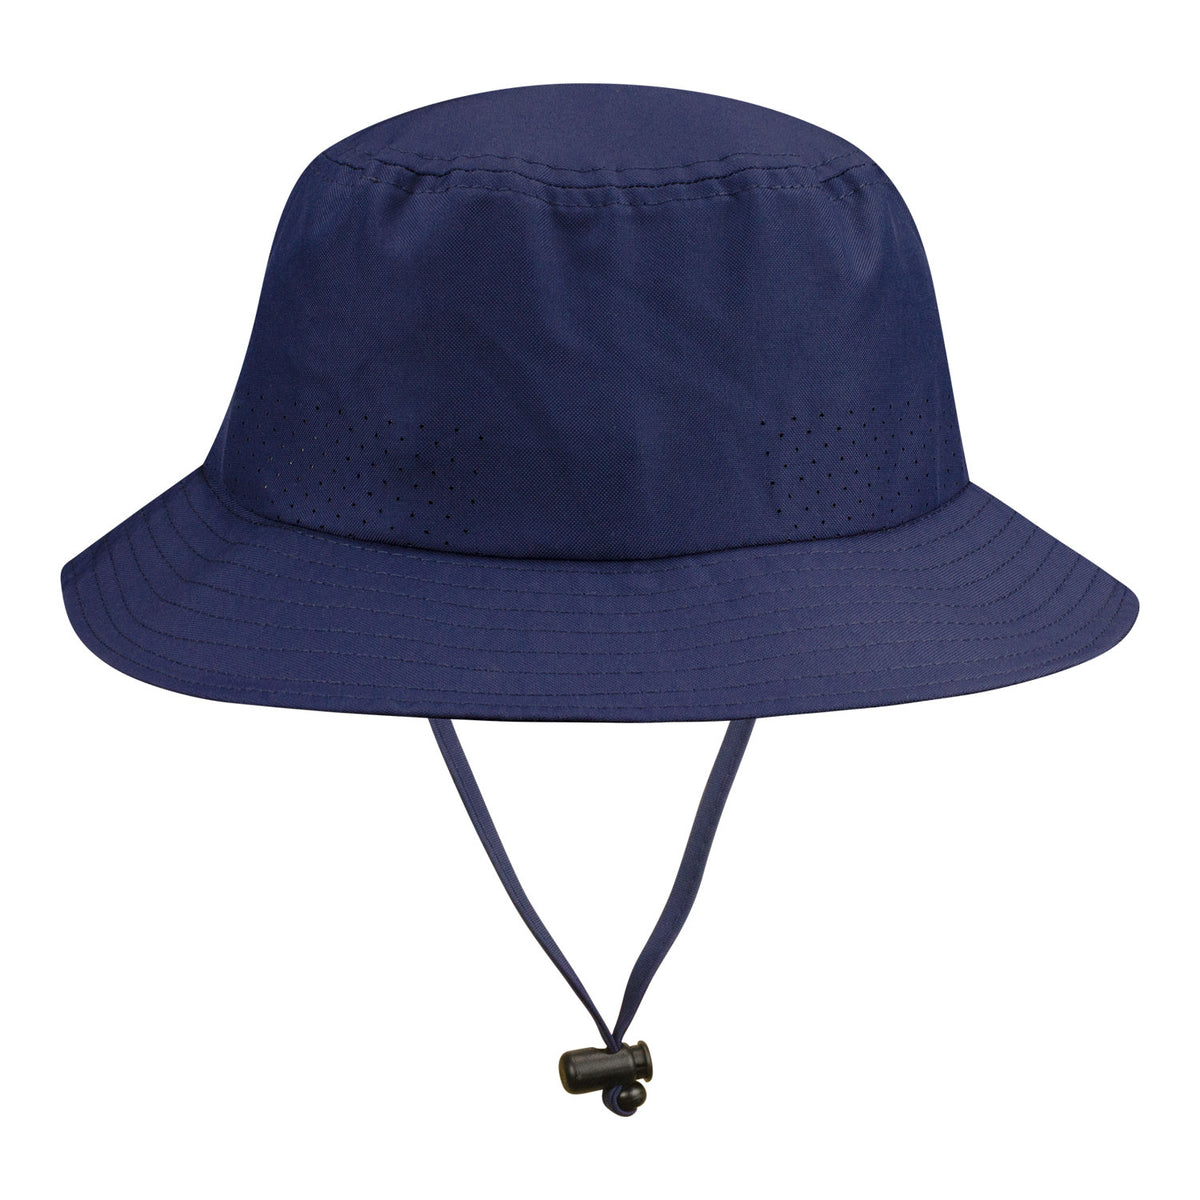 Imperial CC051 - The Geysir Cooling Sun - Protection Bucket in Navy - Back View